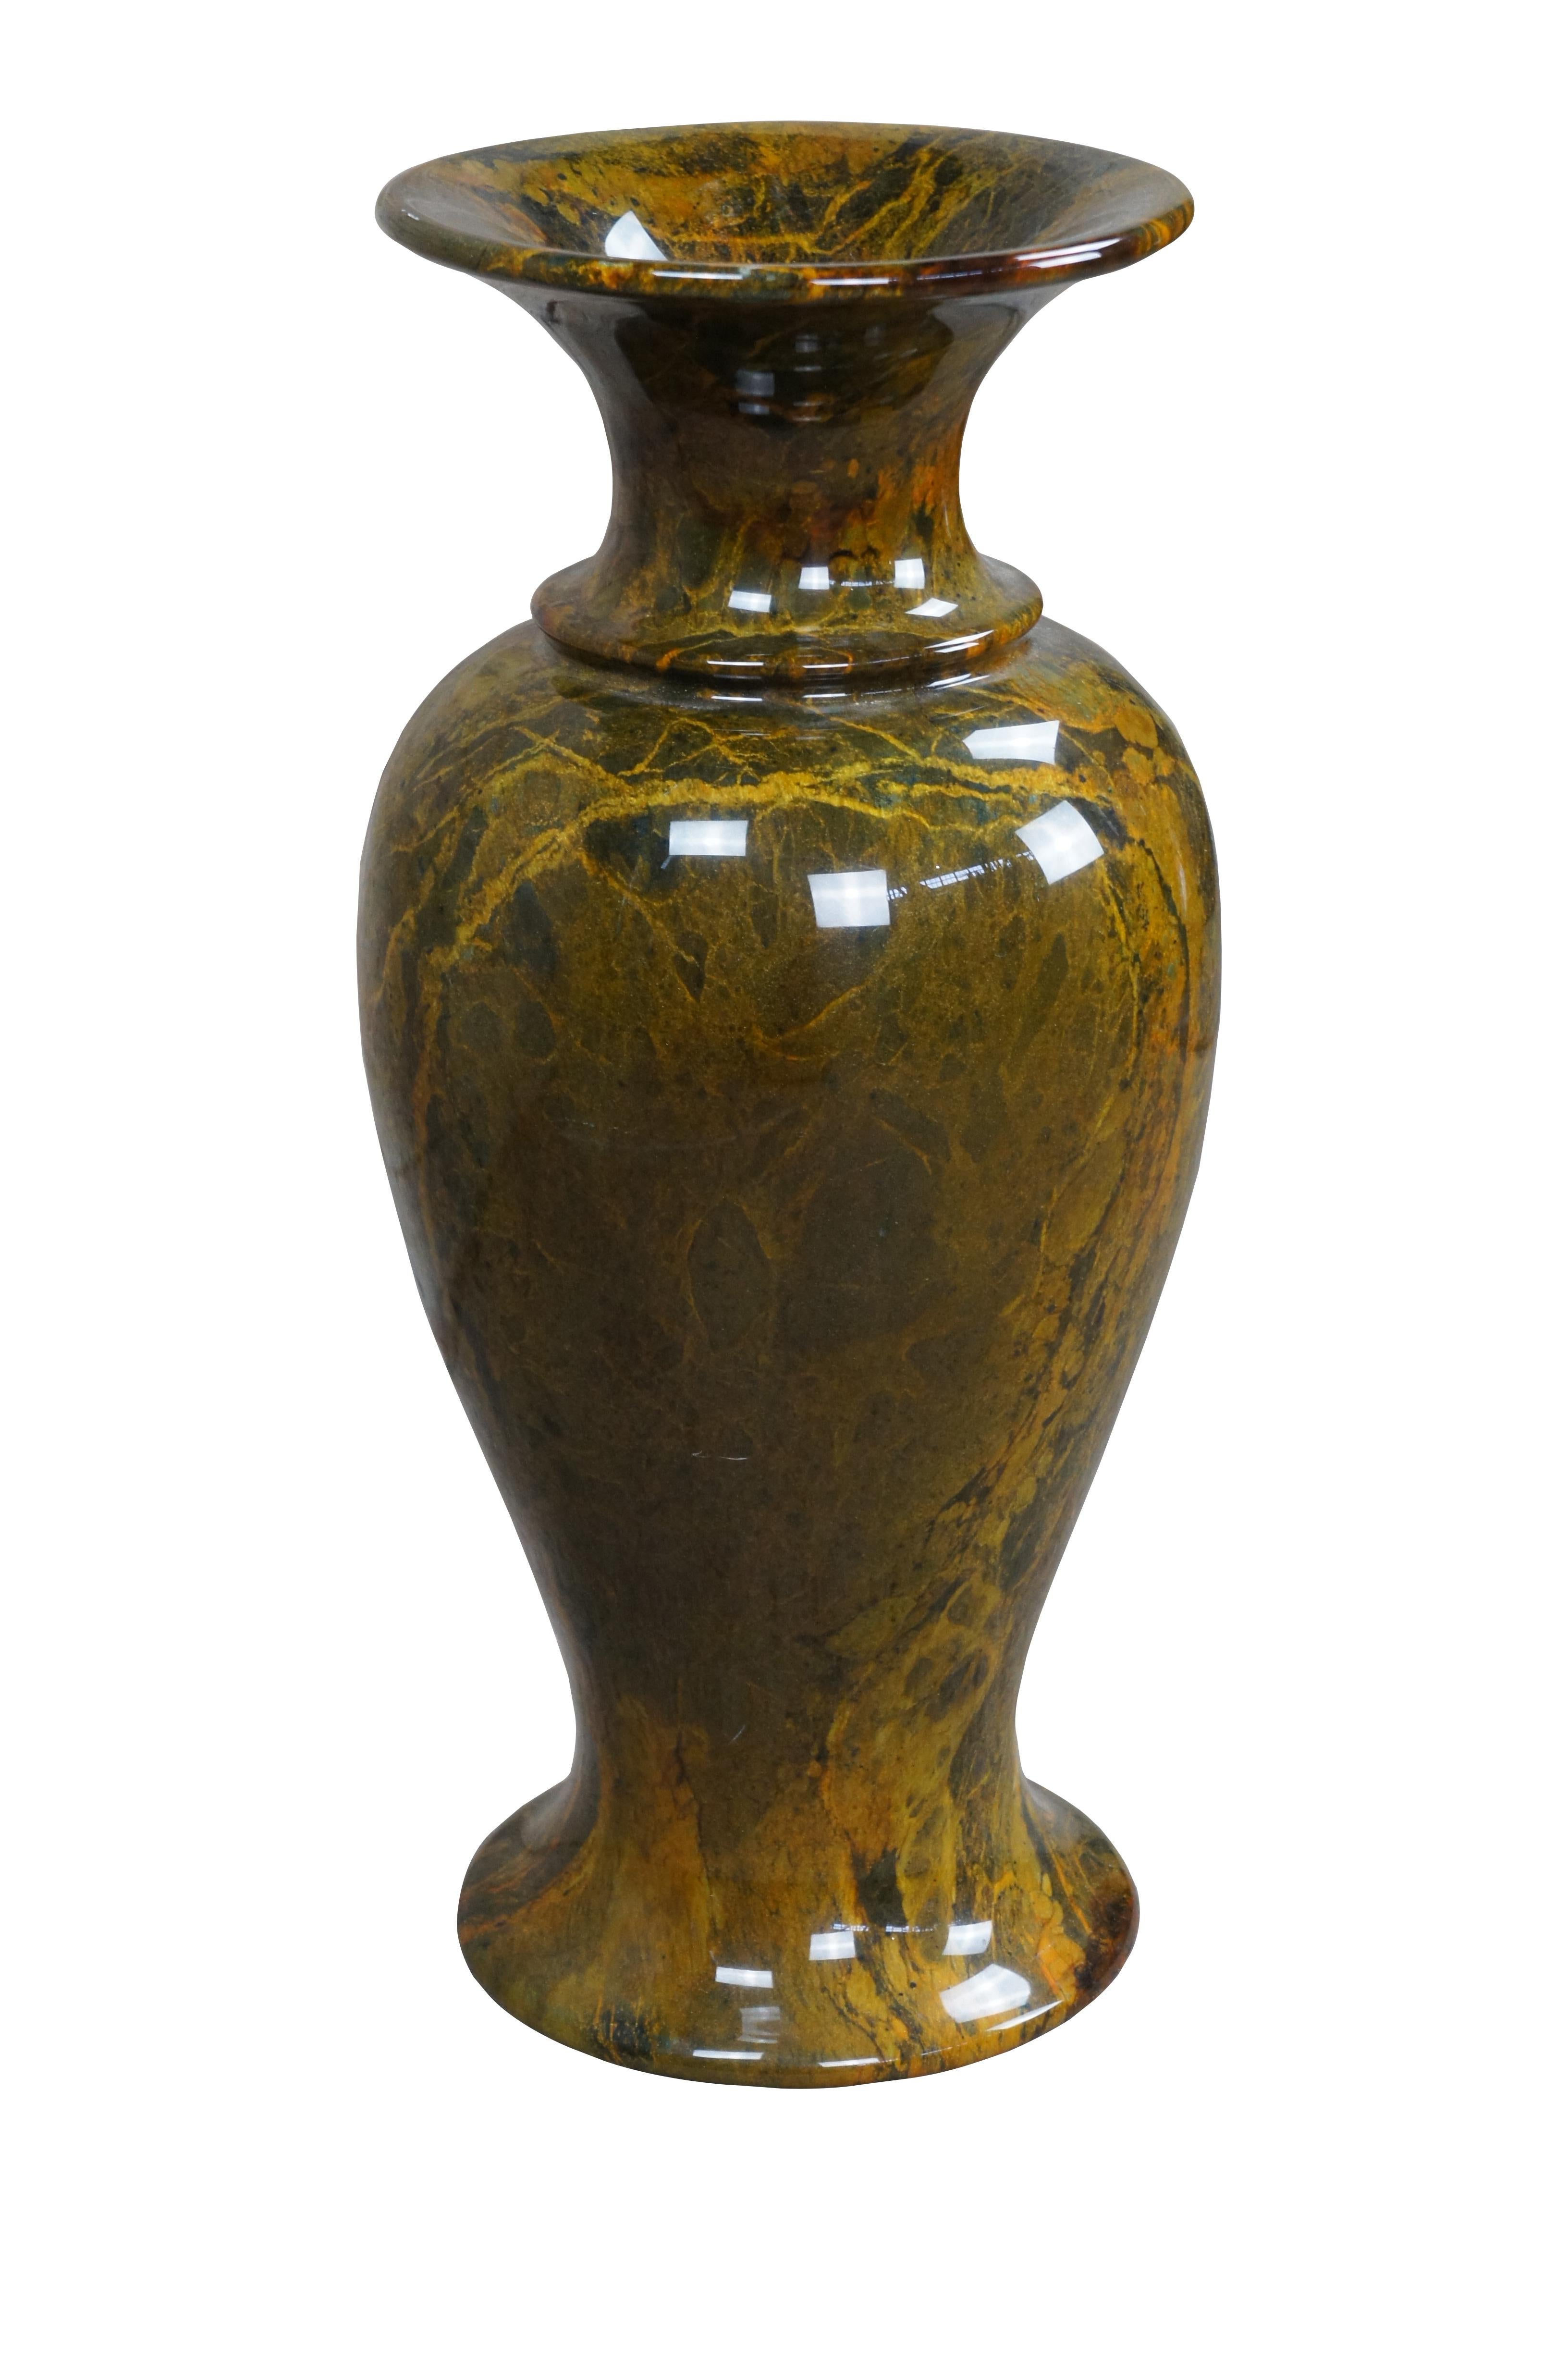 Neoclassical 20th C. Chinese Yellow Green Natural Jade Carved & Polished Marble Vase Urn 23